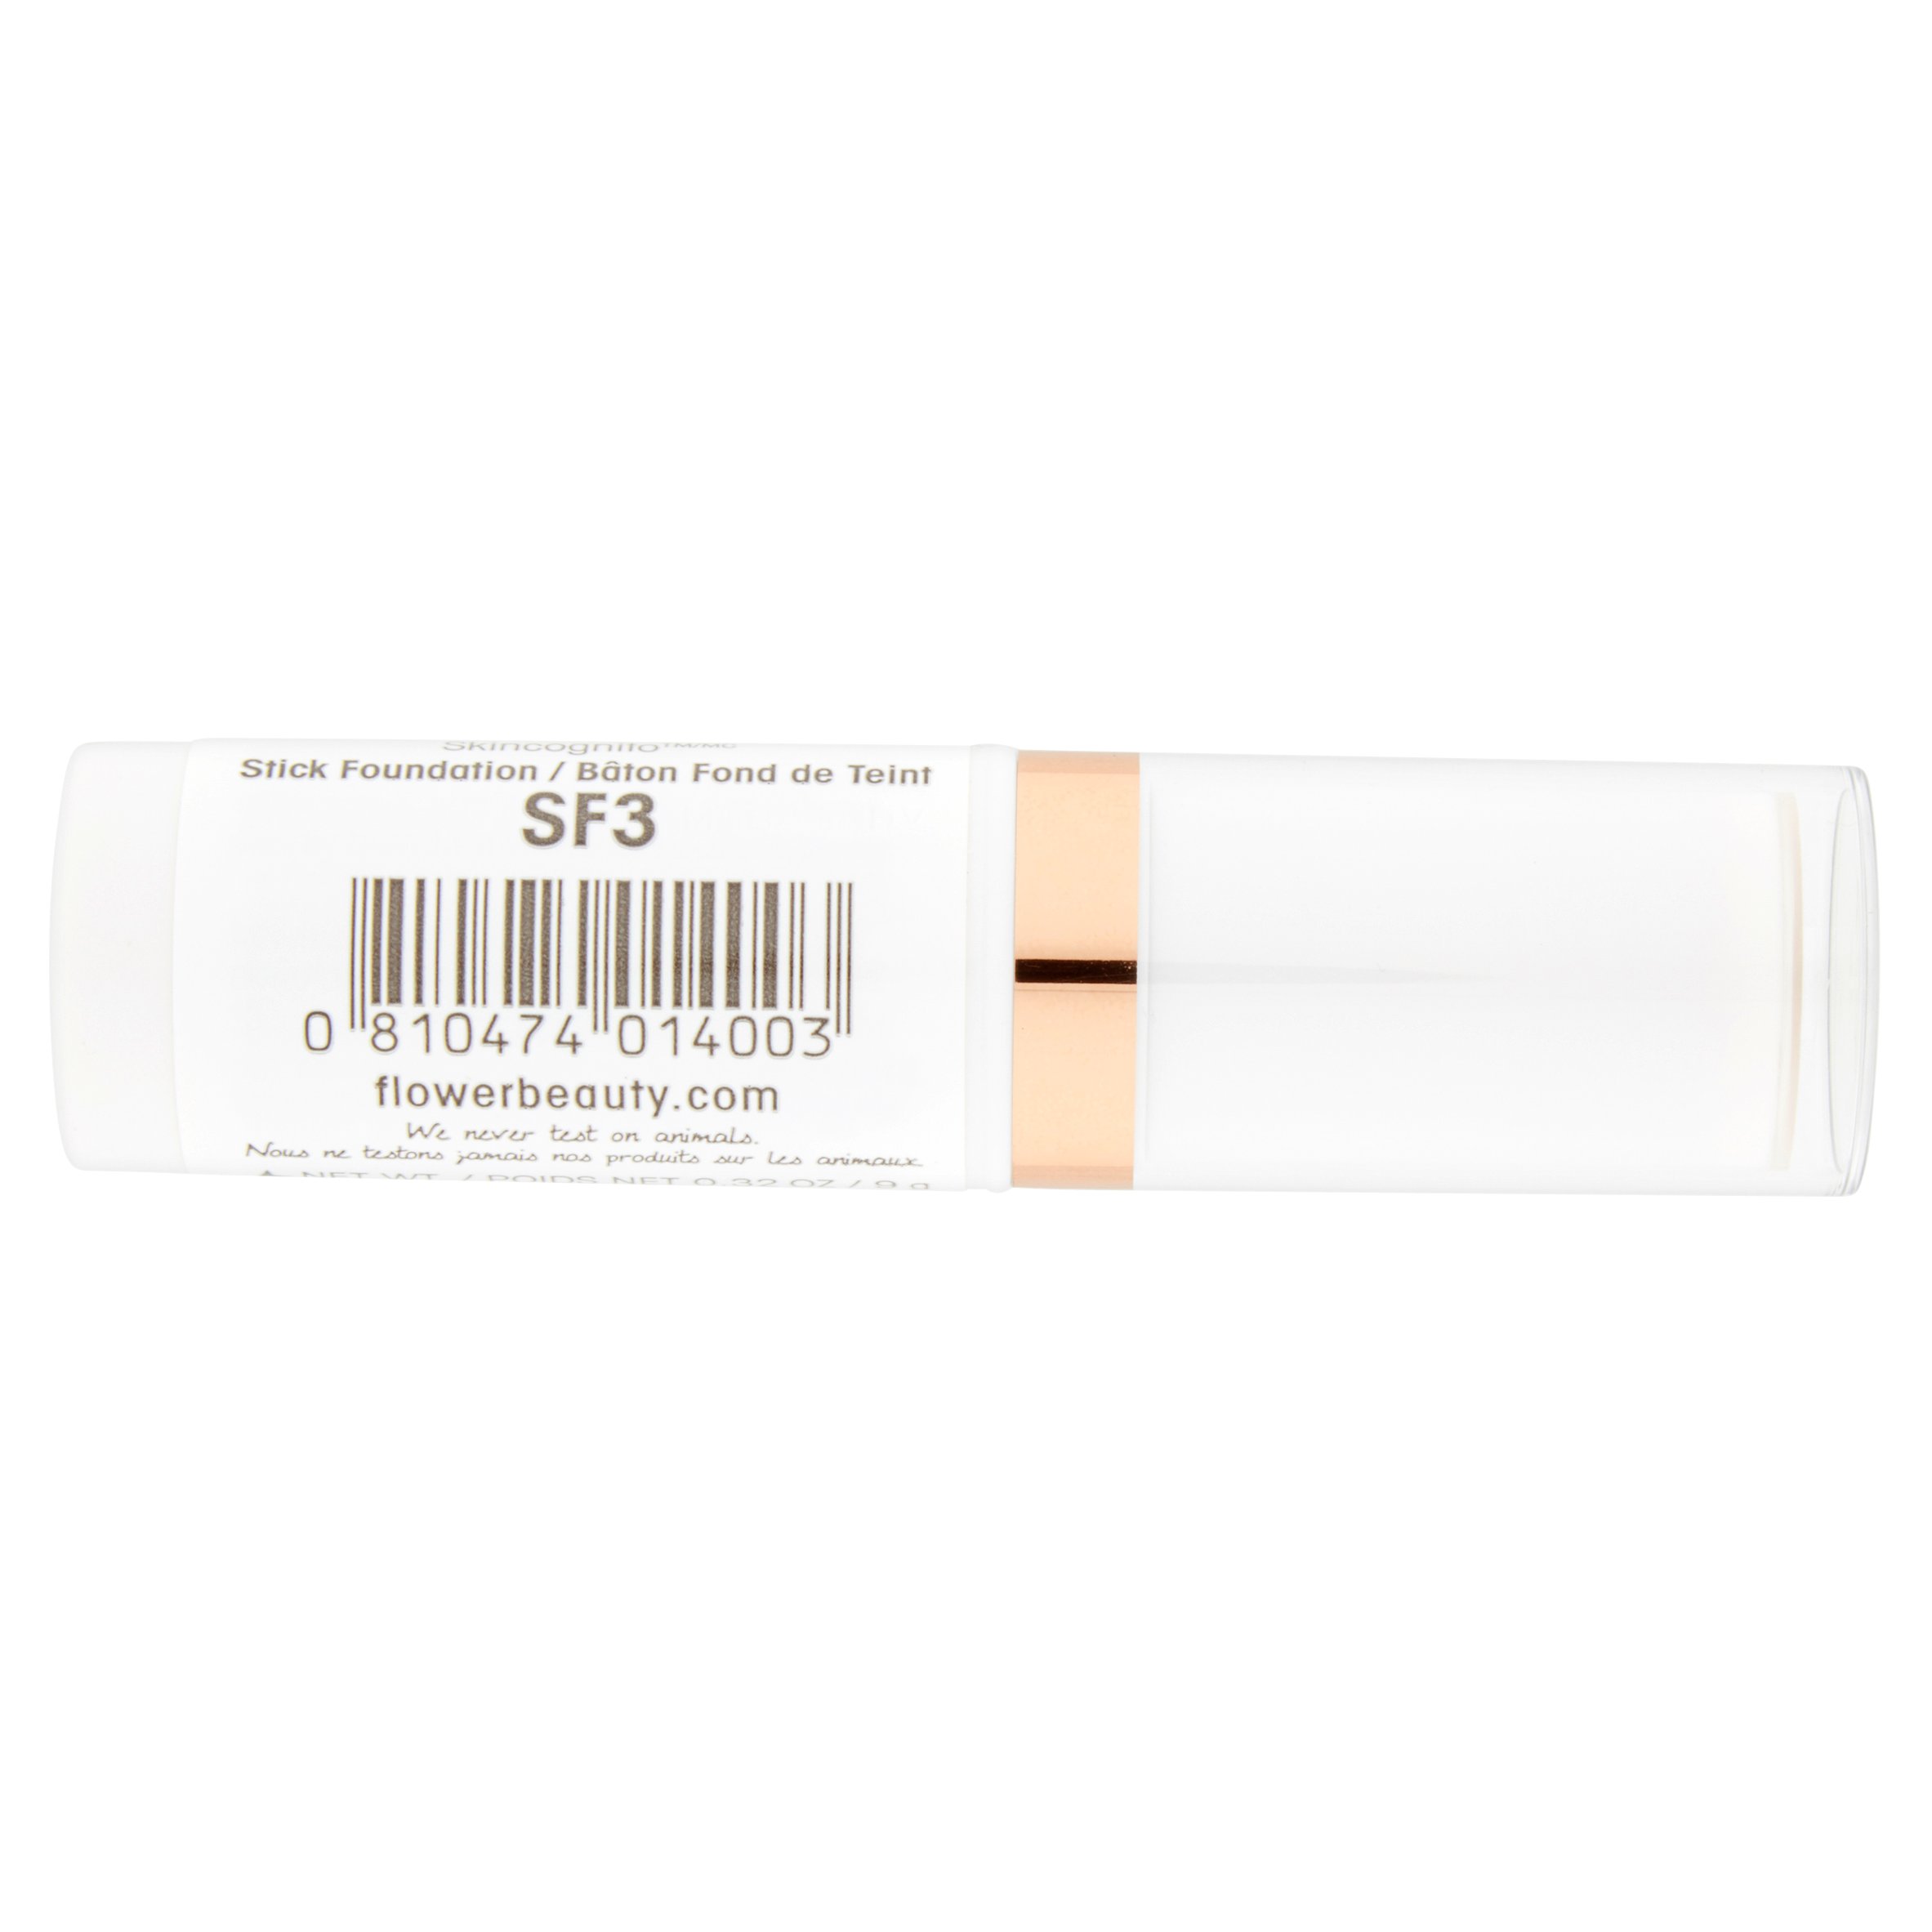 FLOWER Skincognito Stick Foundation, Shade 3 - image 4 of 5